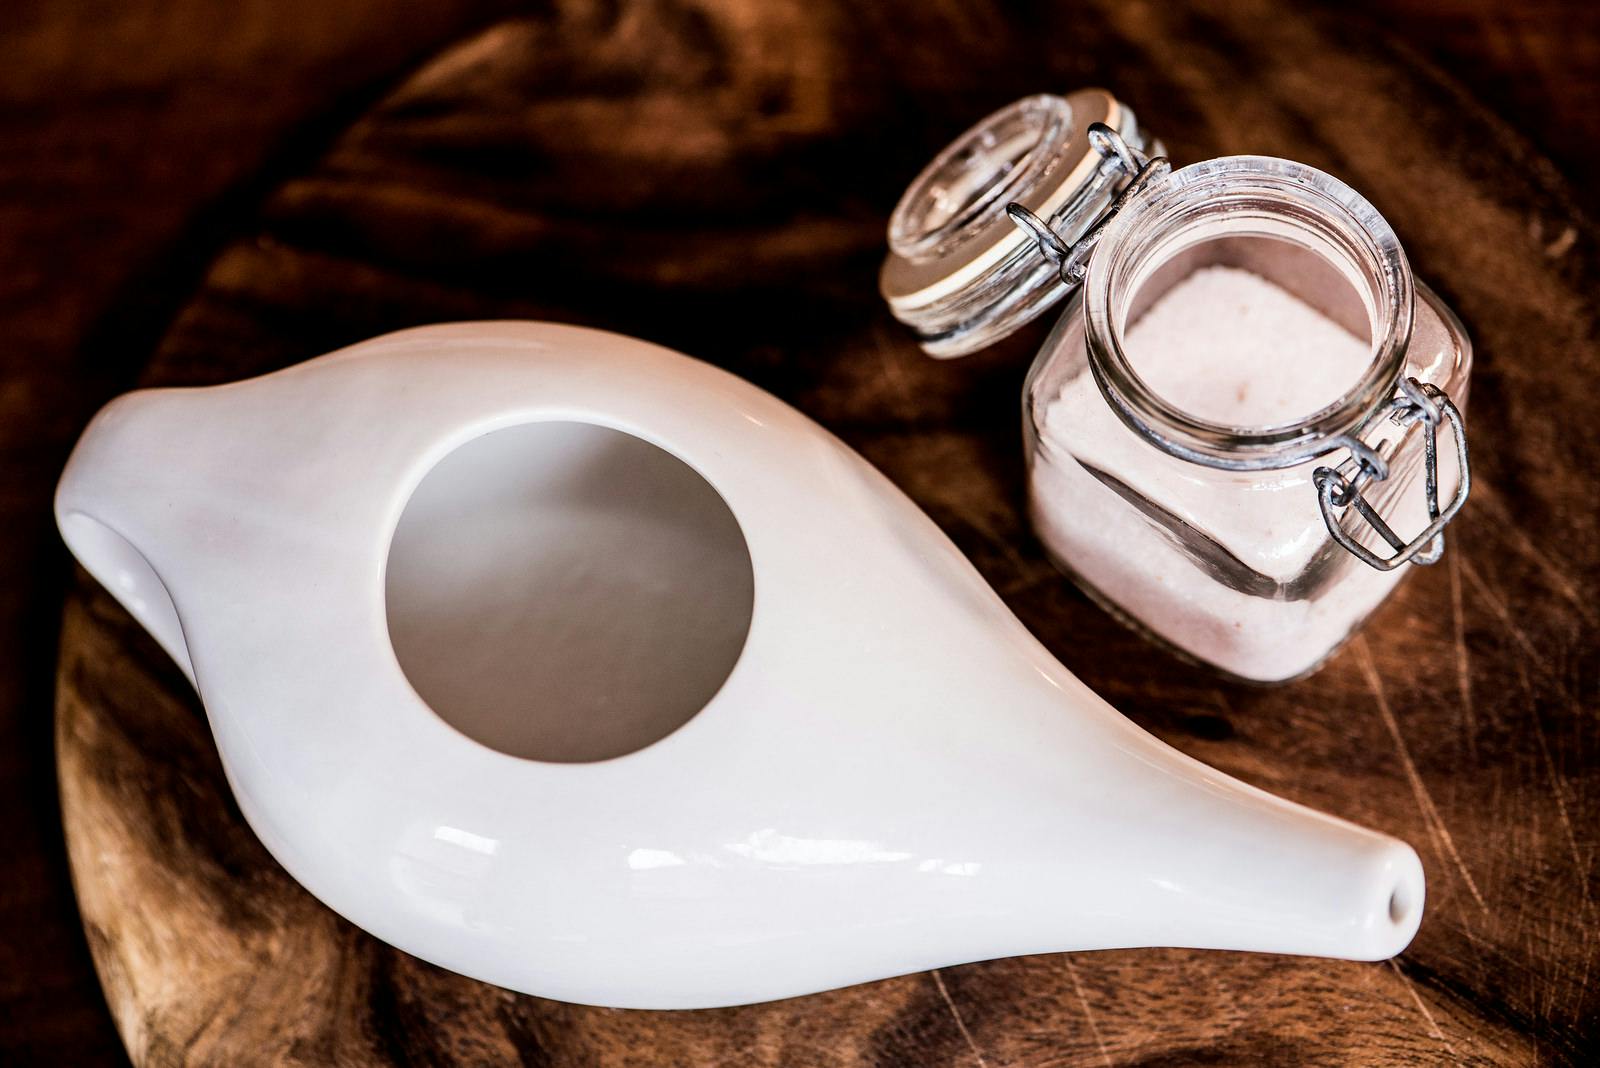 Neti pot, ayurvedic tools for cleaning nose with water and salt, view from top, wooden table and board on background
